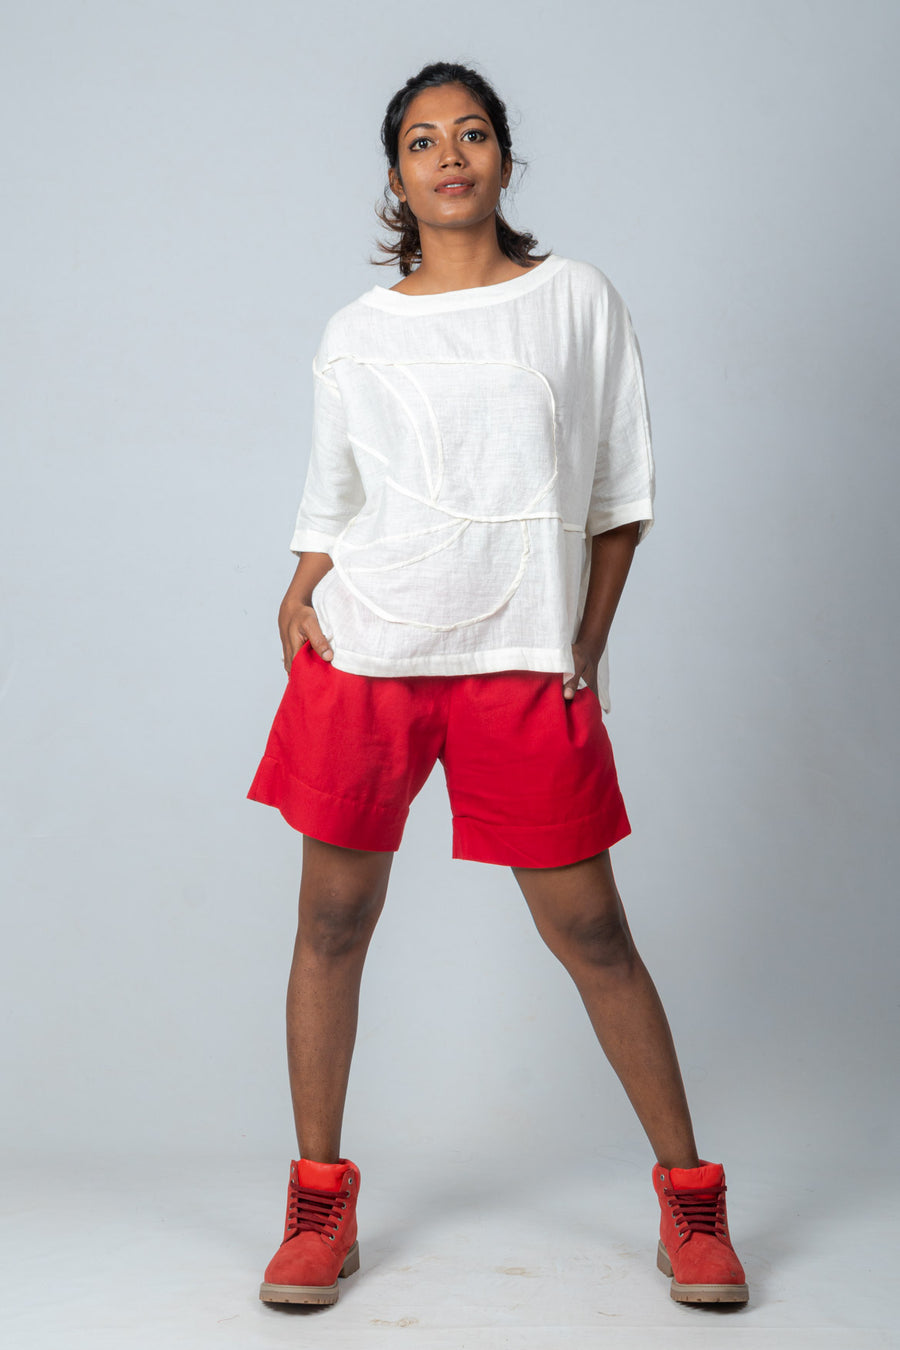 Off White Khadi Top with Red Shorts- SUSAN LIMA SET